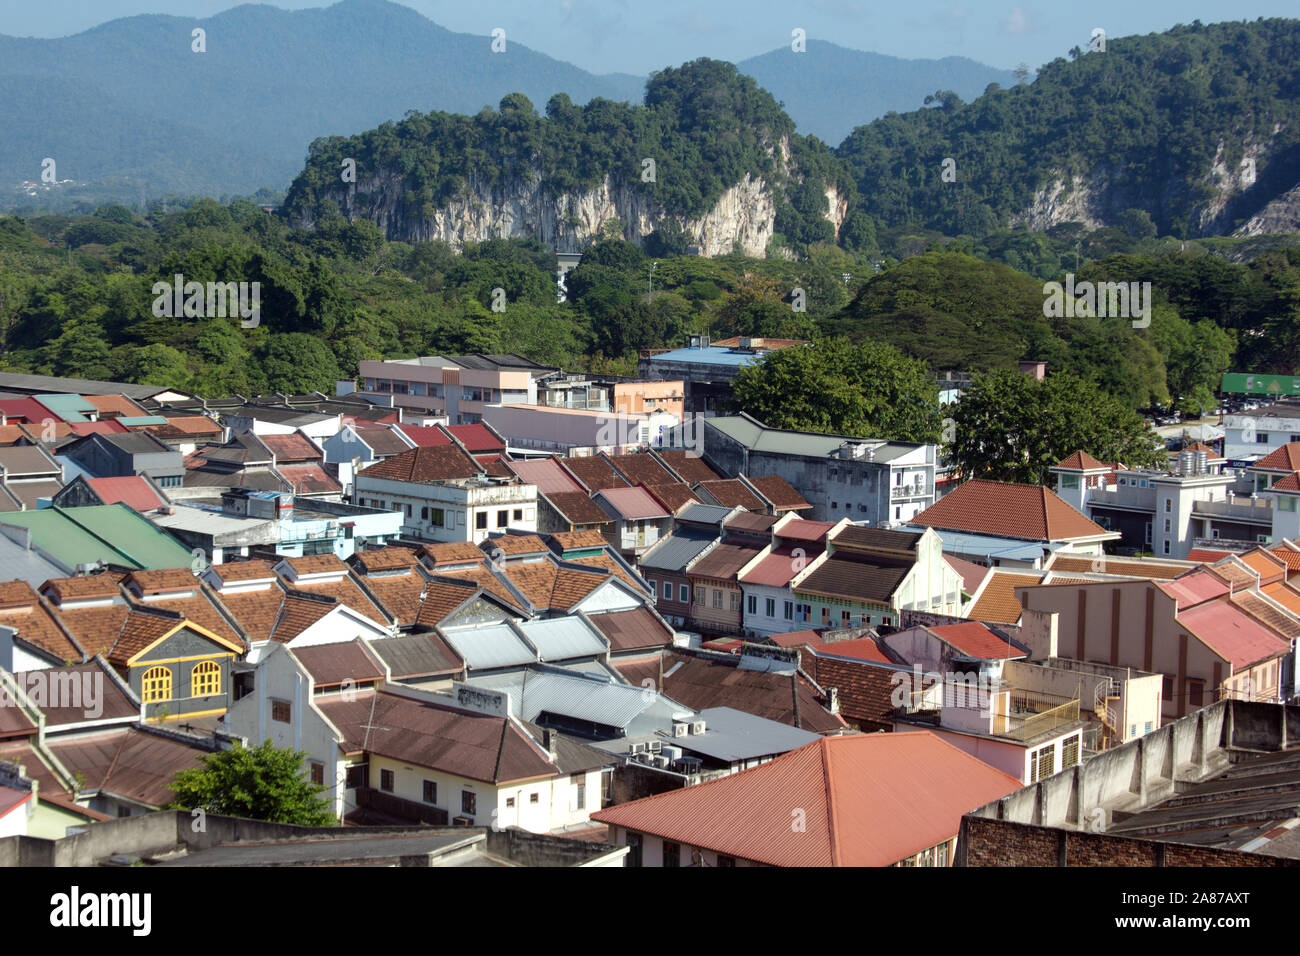 Ipoh, Perak, Malaysia, is a low-rise city surrounded by mountains. Stock Photo